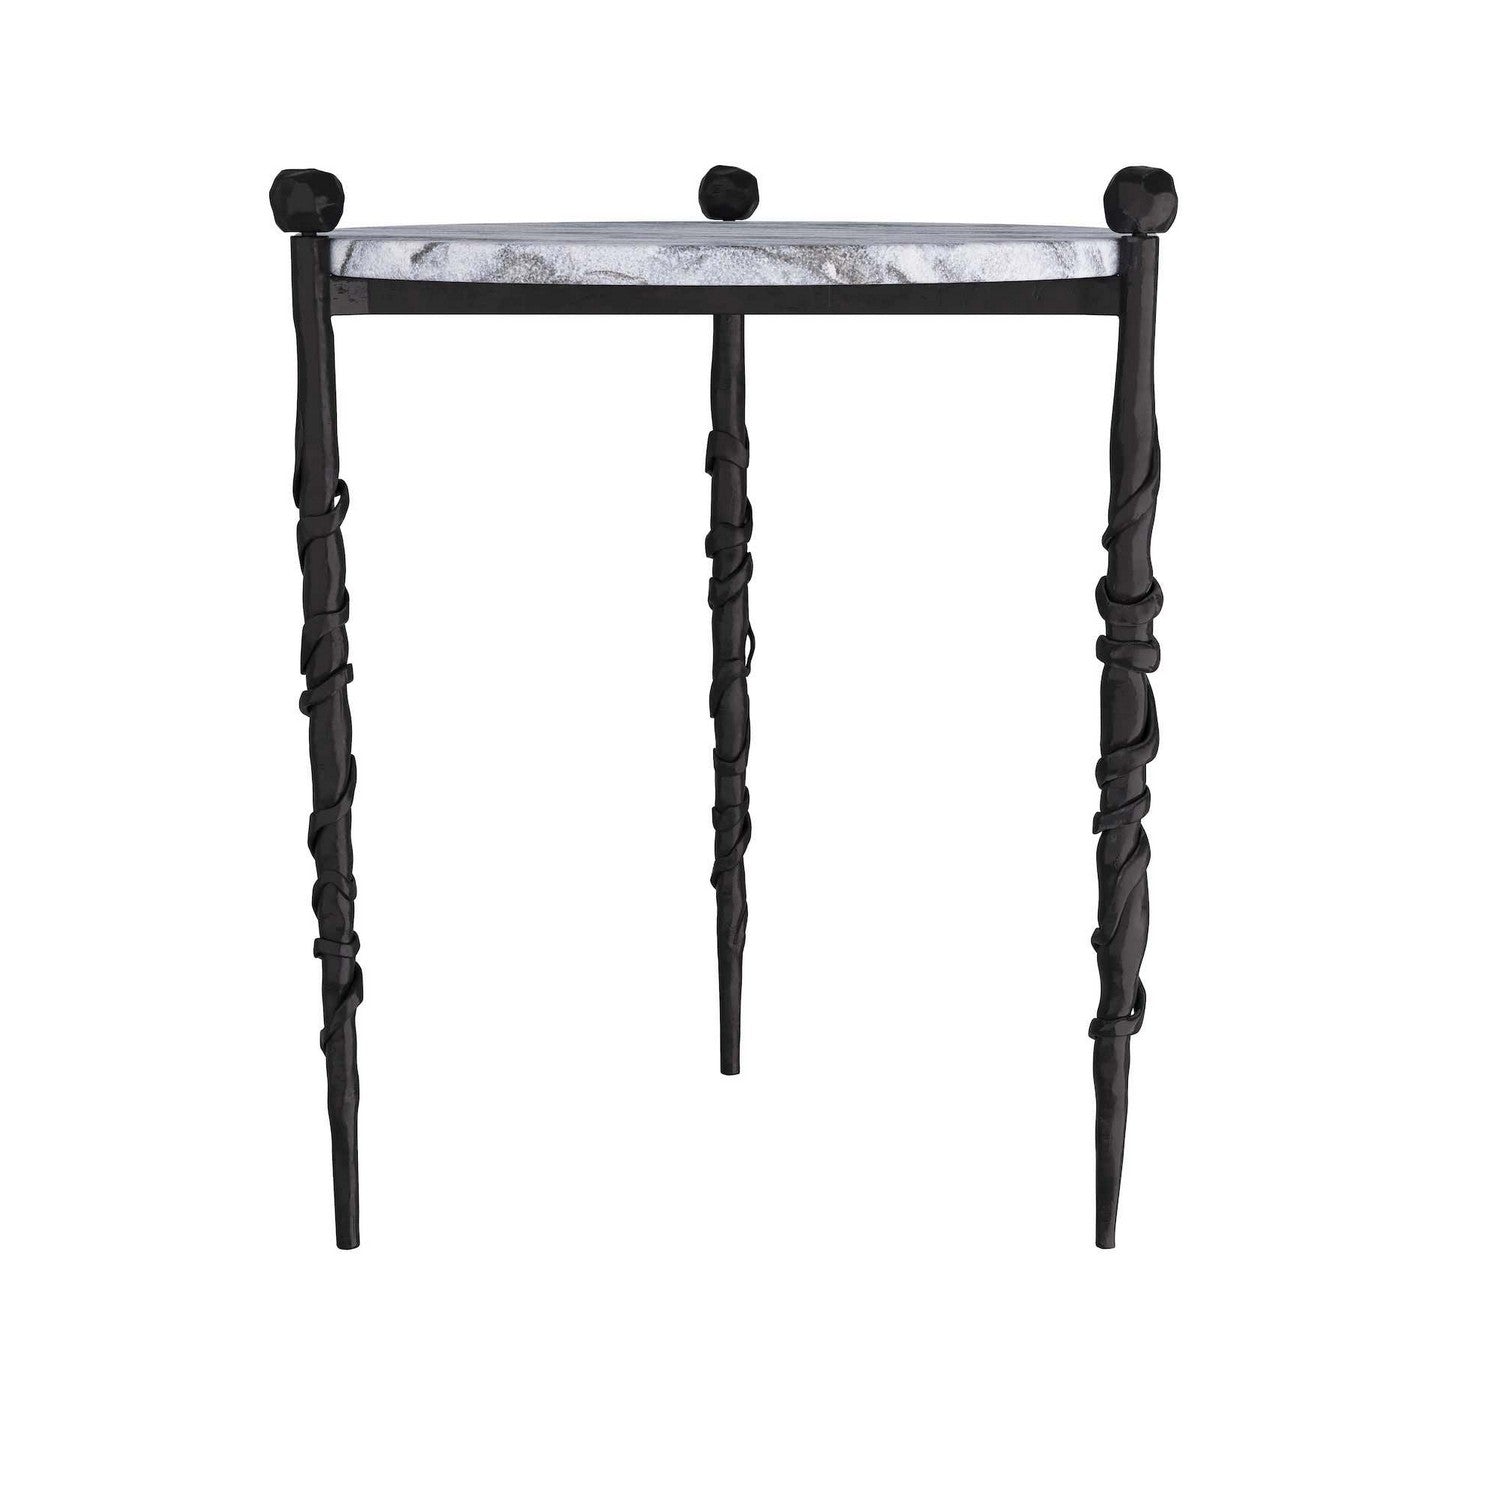 End Table from the Blackthorn collection in Galaxy finish